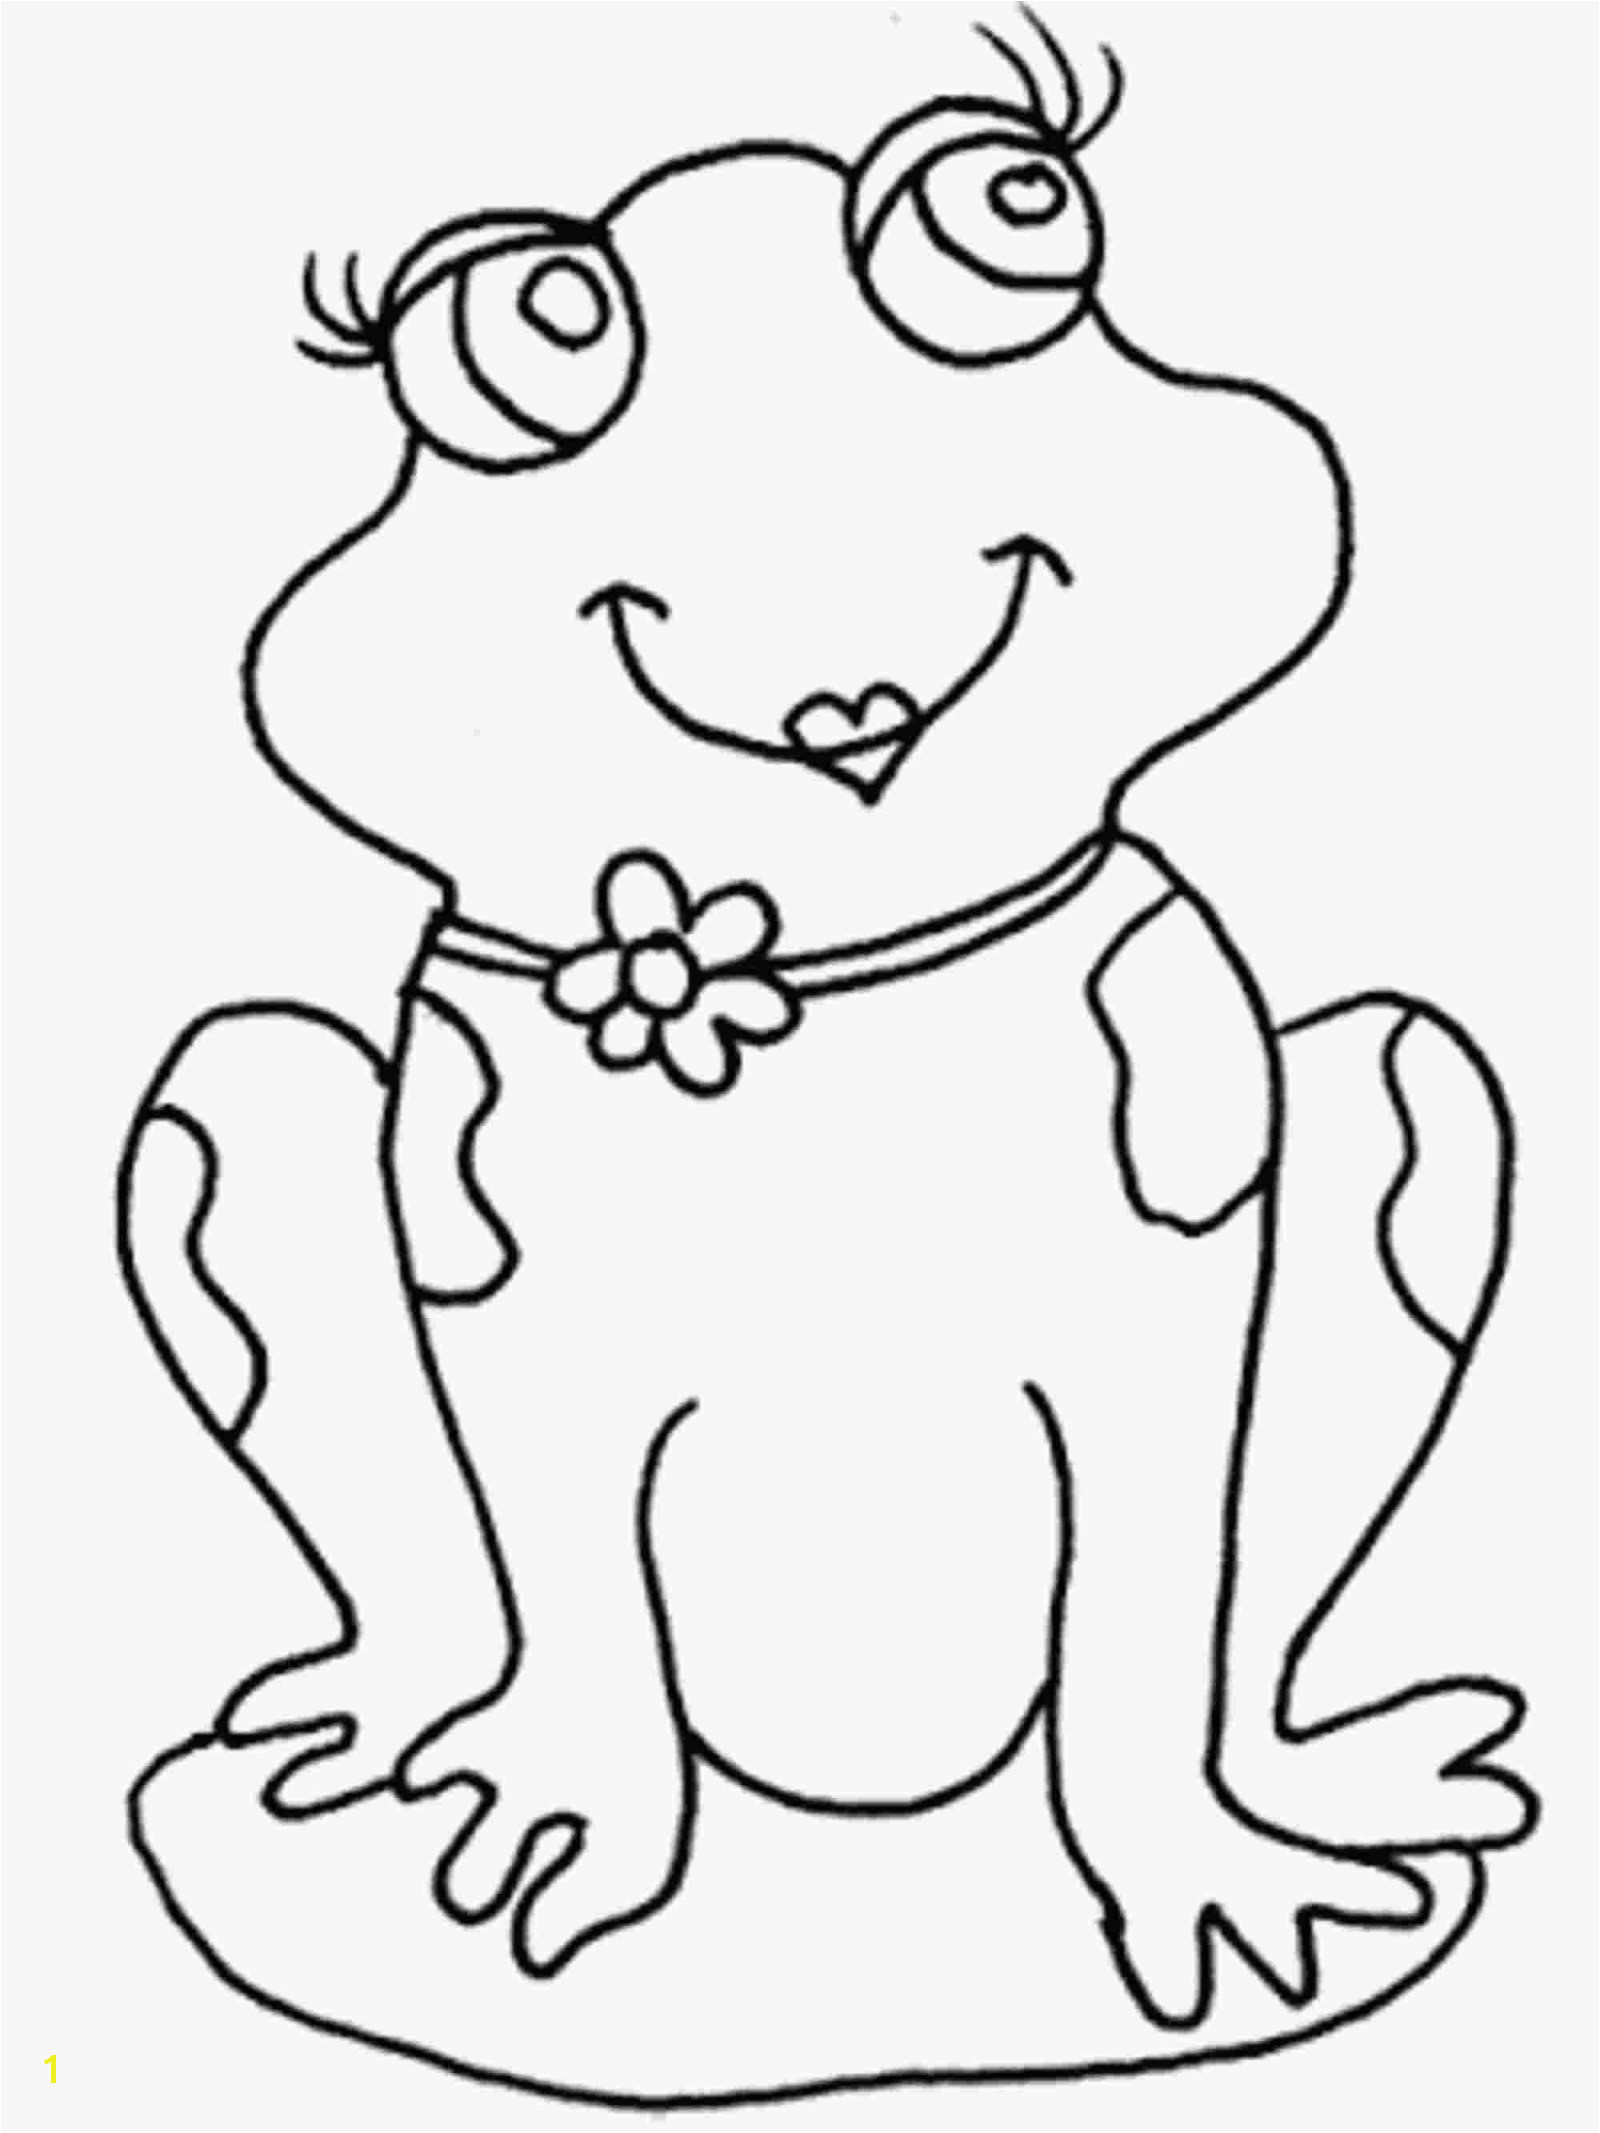 Scooby Doo Coloring Pages Awesome Free Frog Coloring Pages Ruva